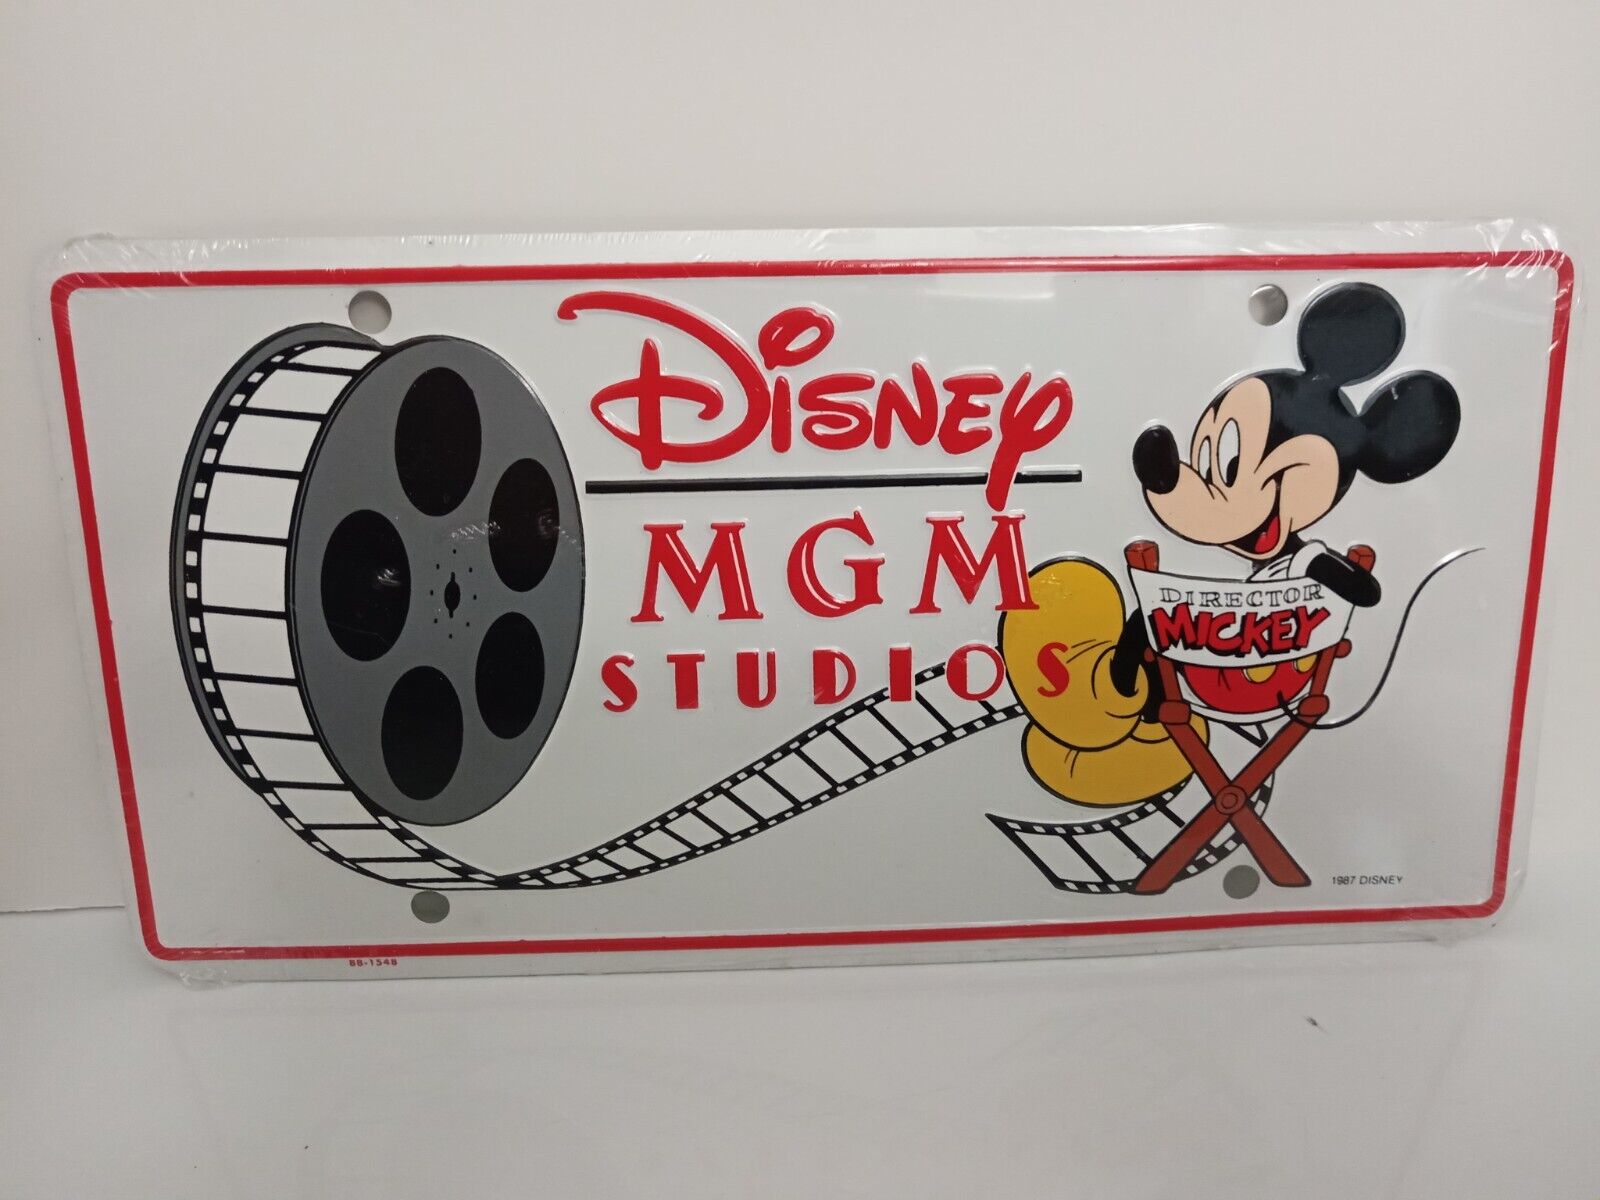 Vintage 1987 Disney MGM Studios License Plate Director Mickey Mouse New Sealed